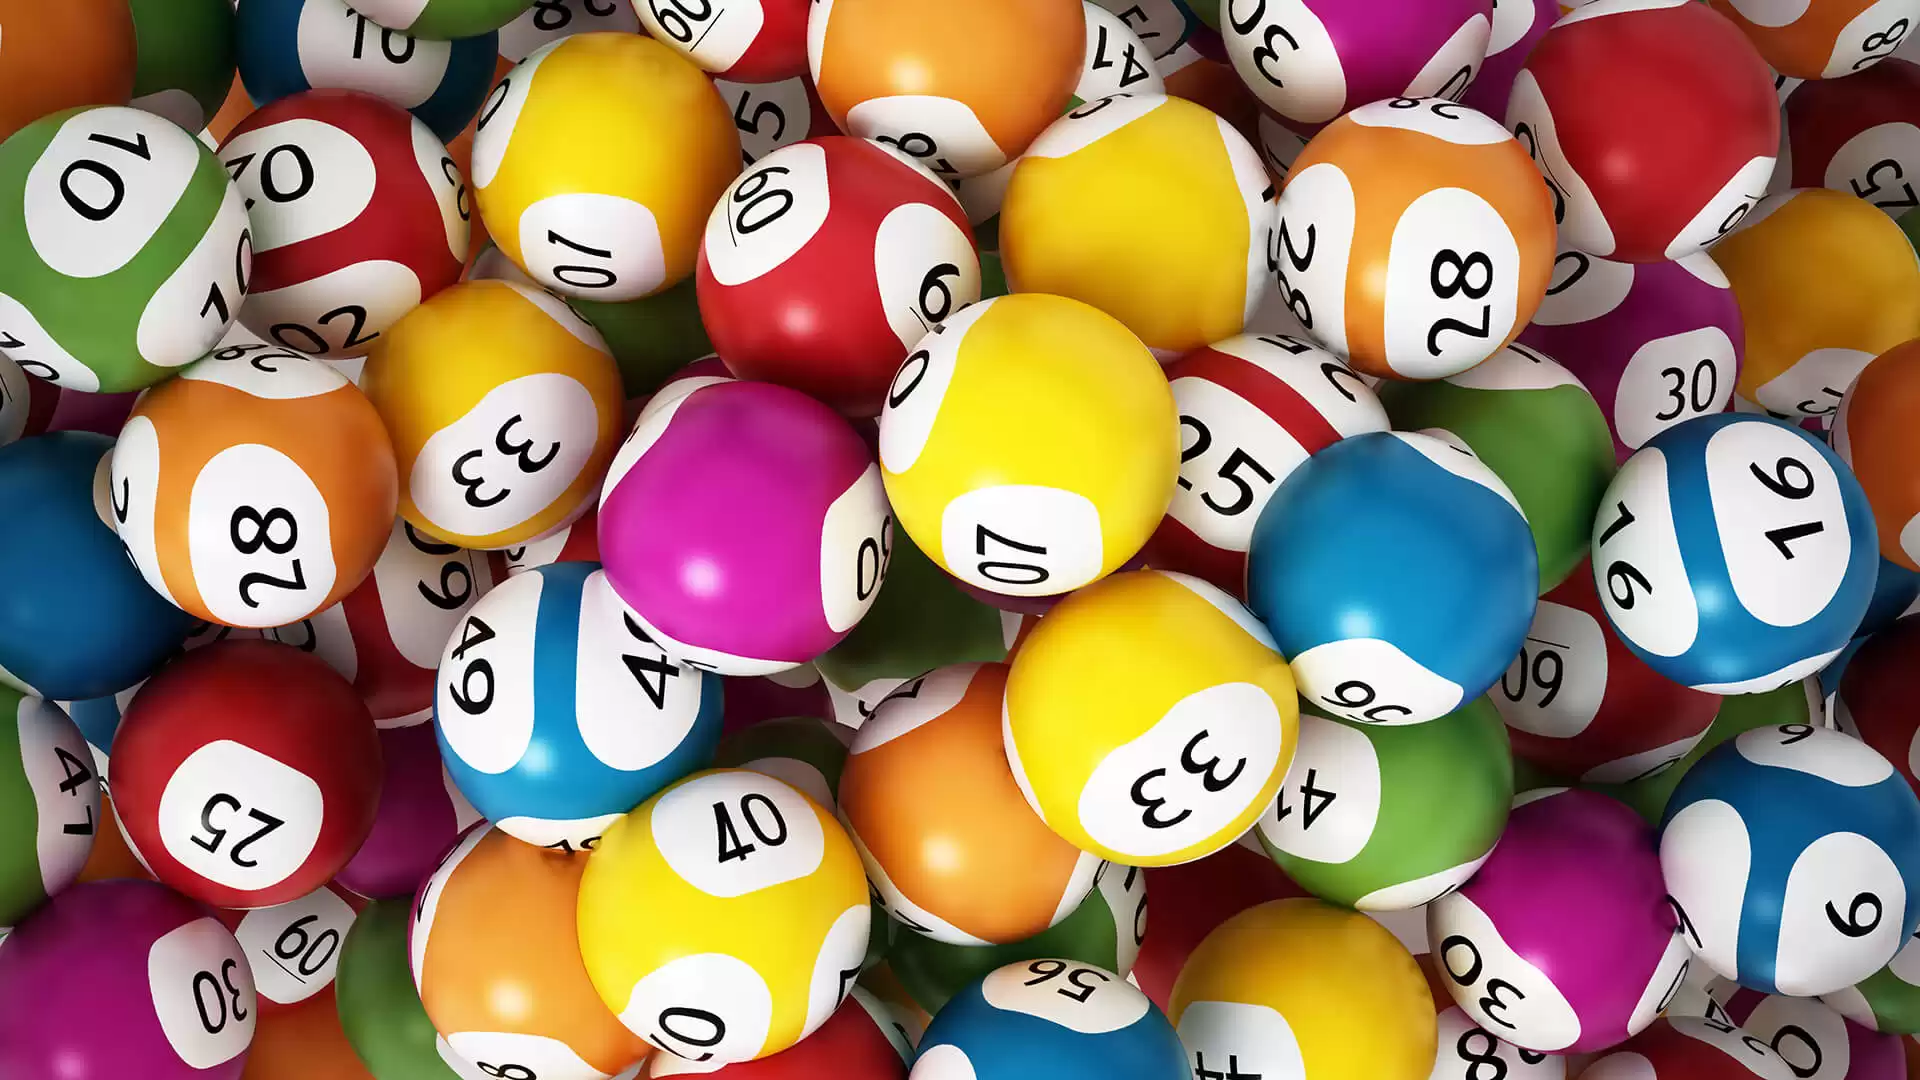 "$2.04 Billion Lottery: How the Winner Used Their Lump Sum Payout"